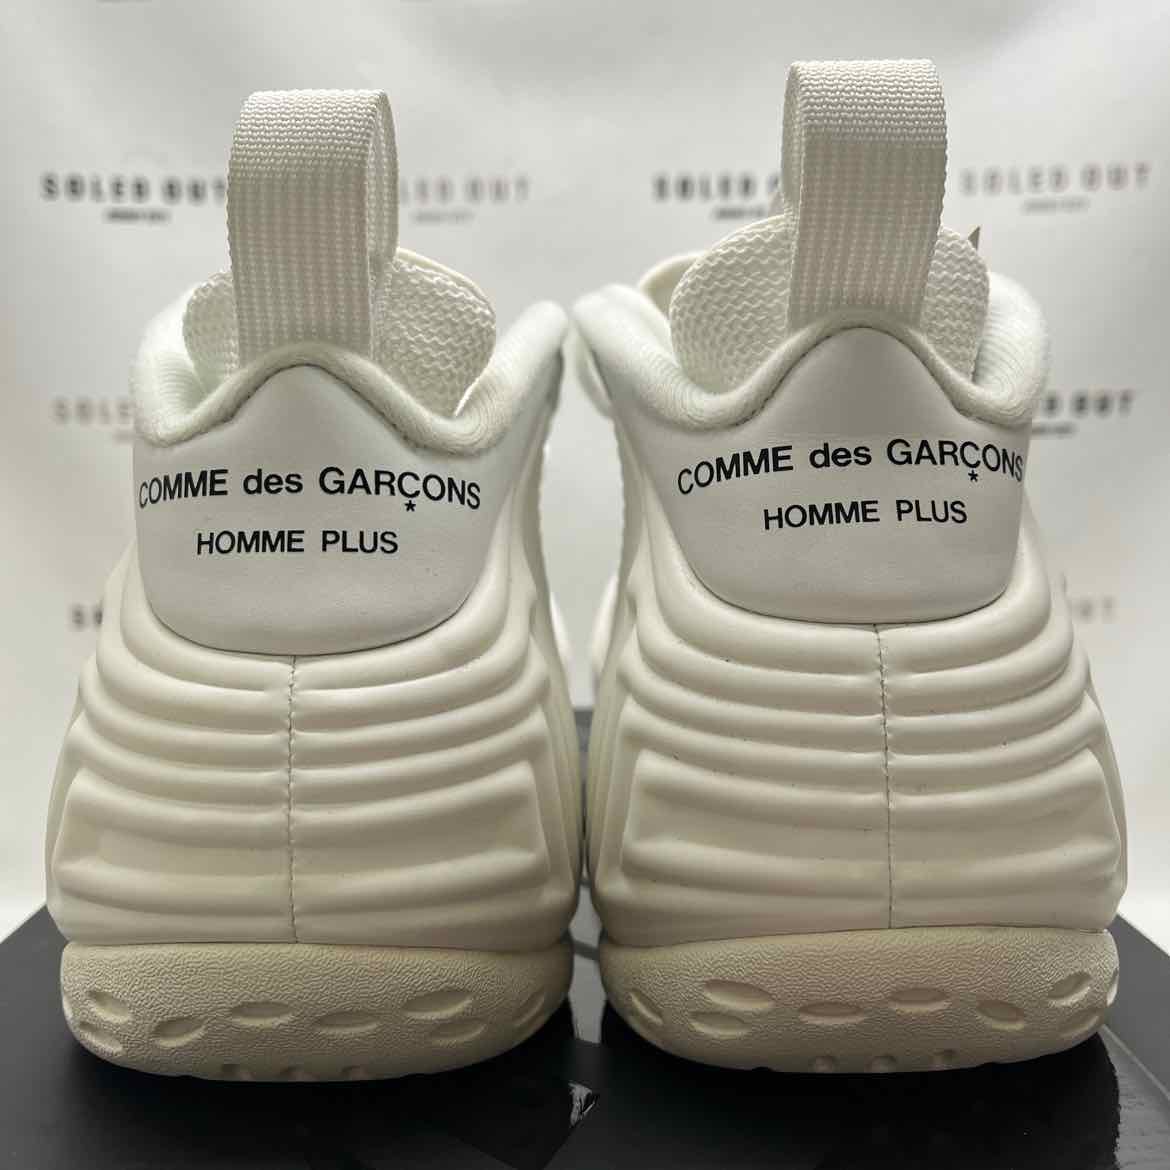 Nike Air Foamposite One "Cdg White" 2021 New (Cond) Size 10